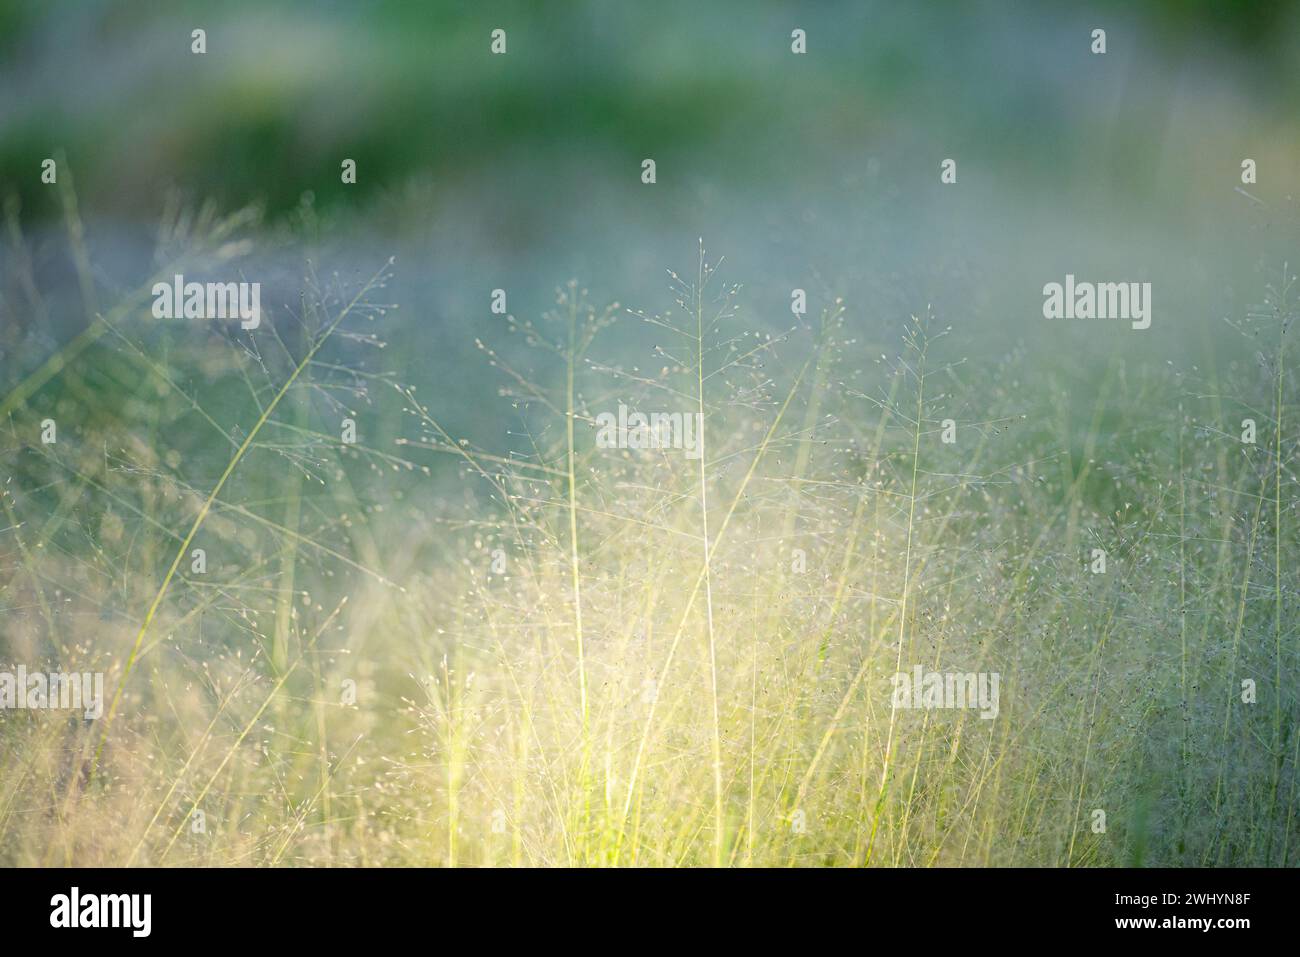 Ethereal, Lit, Whispy, Desert Grass, Beauty, Green, Pastel Colors, Shallow Depth of Field, Serene, Tranquil Stock Photo